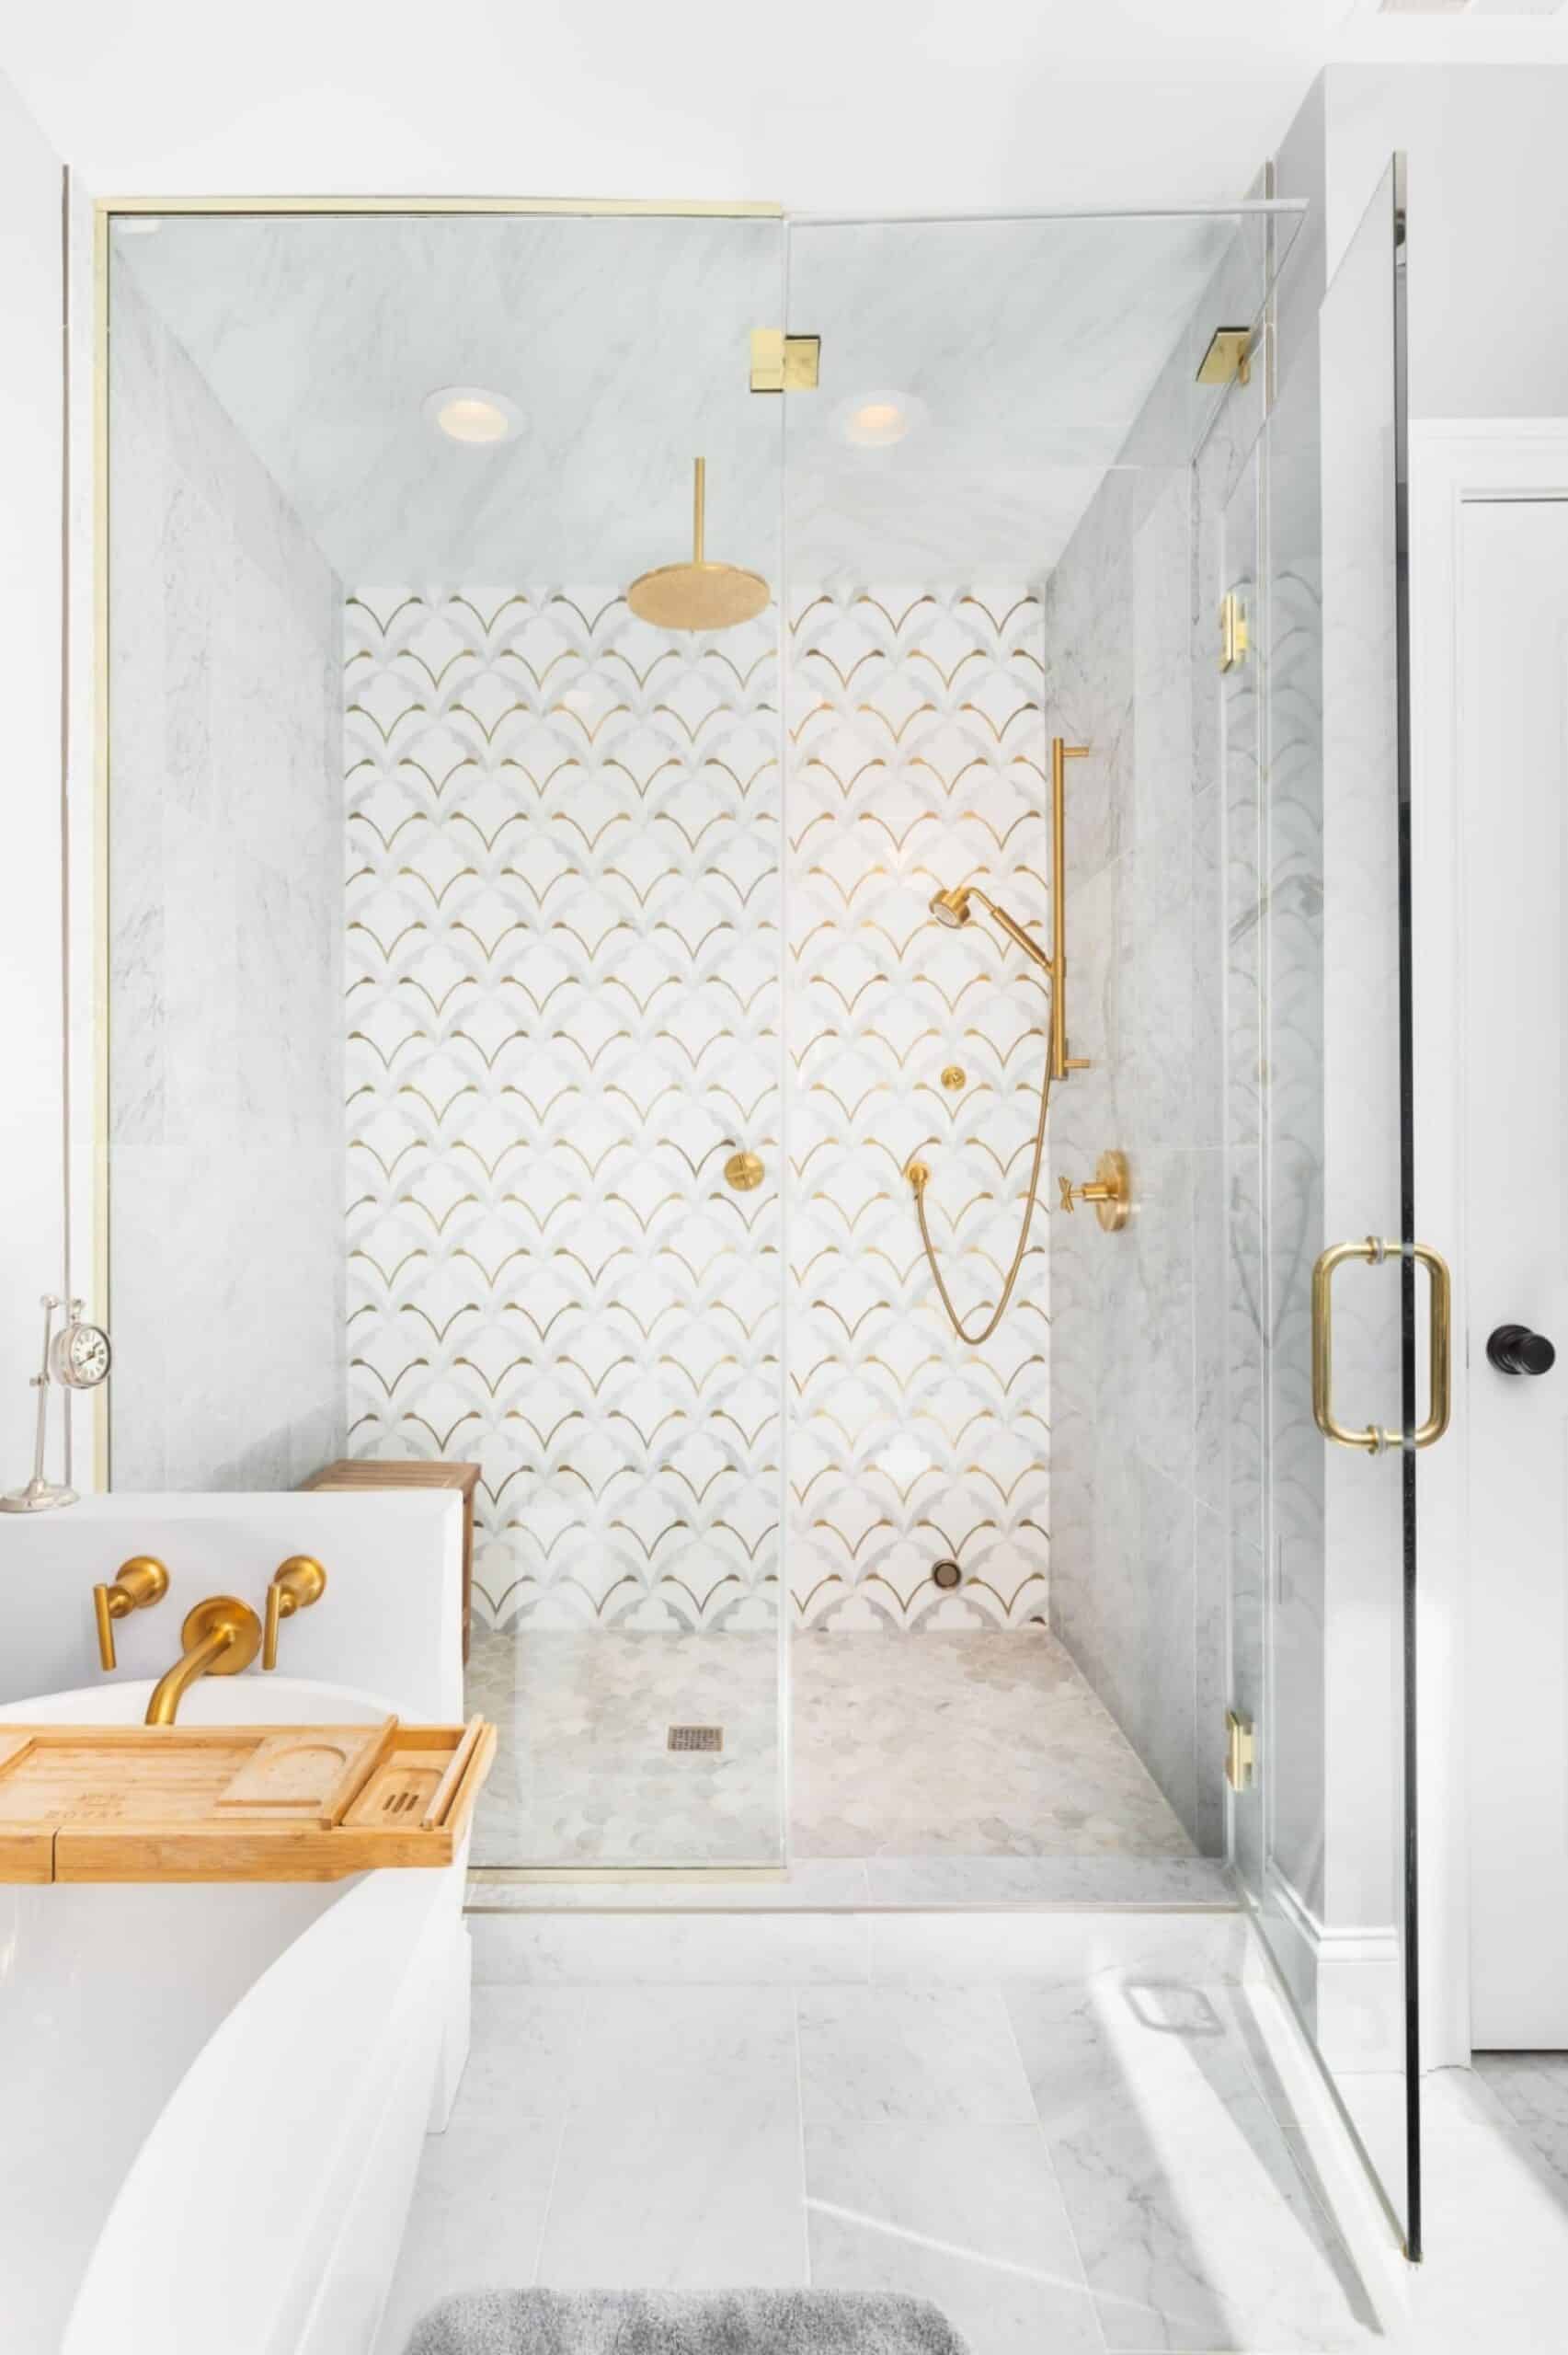 How to Clean Glass Shower Doors Tidyhere Image of a Modern Bathroom With Gold Accent